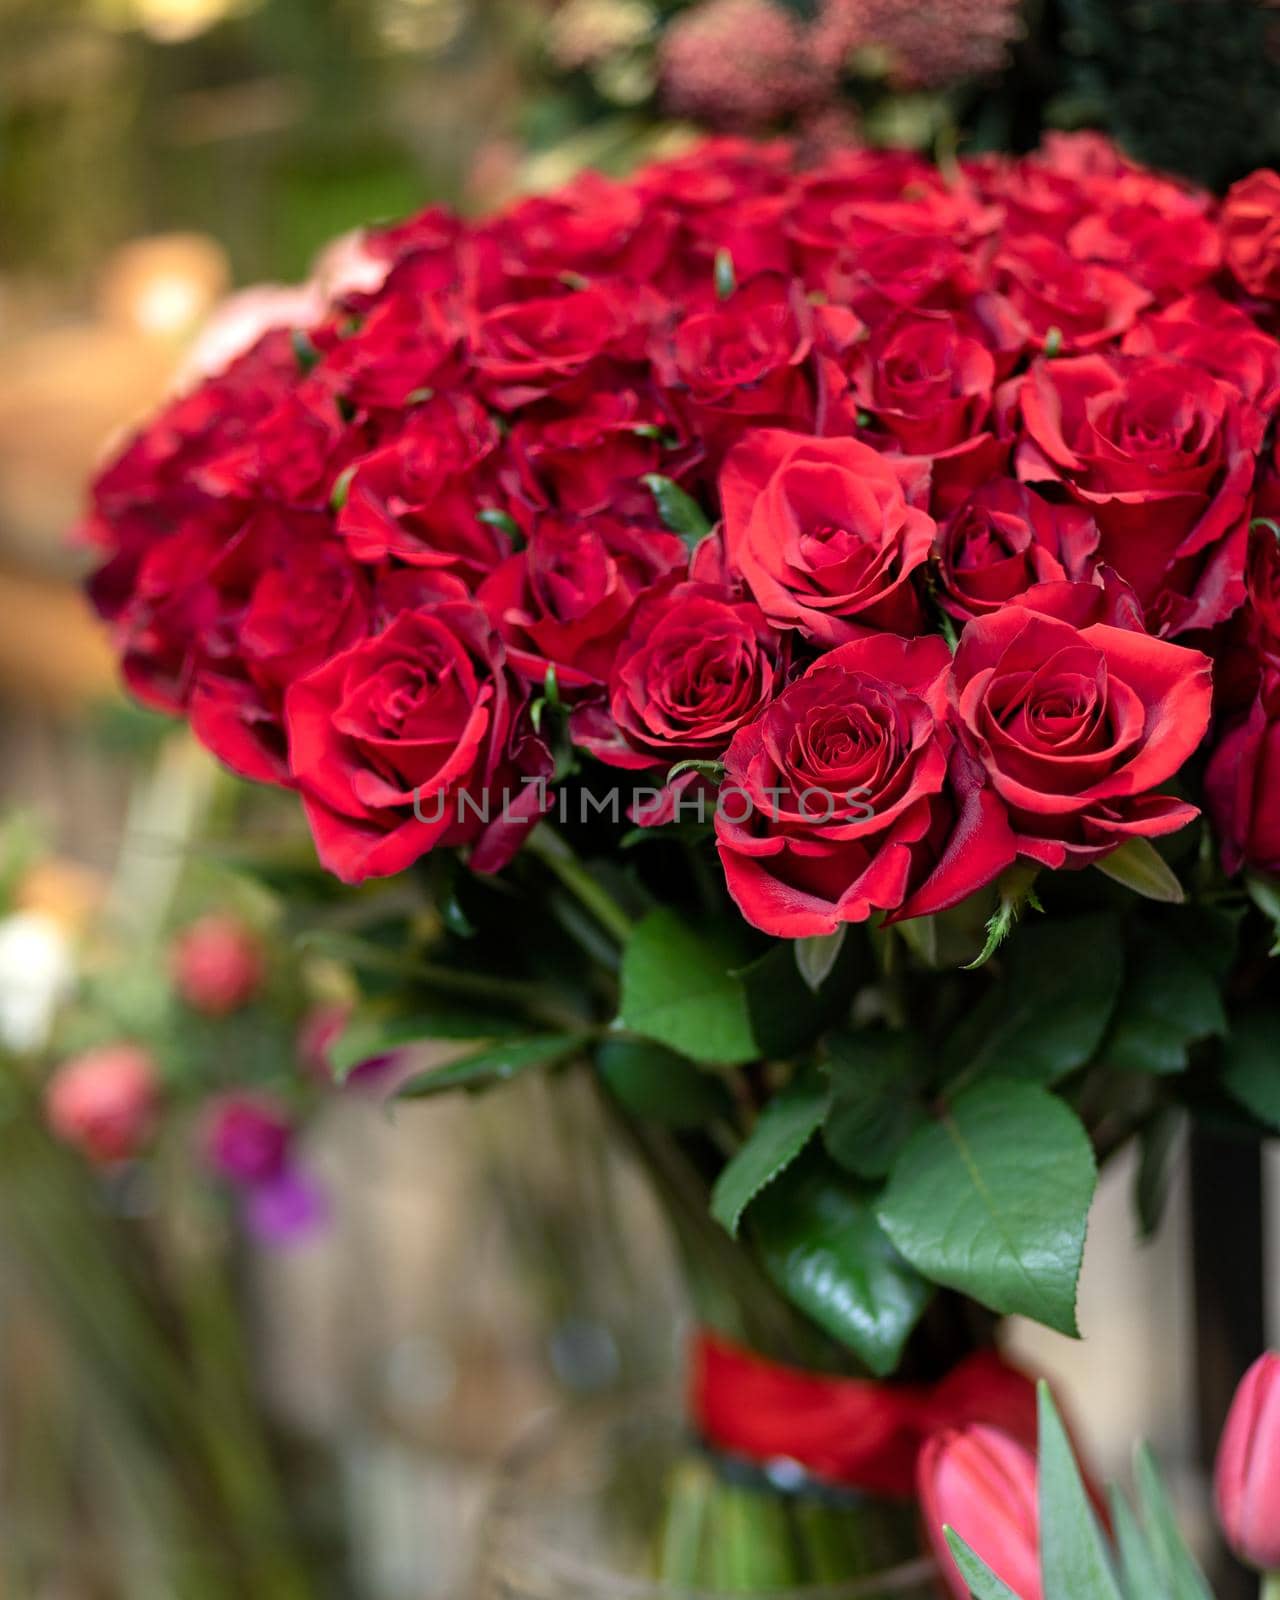 Red rose bouquet close up by ferhad